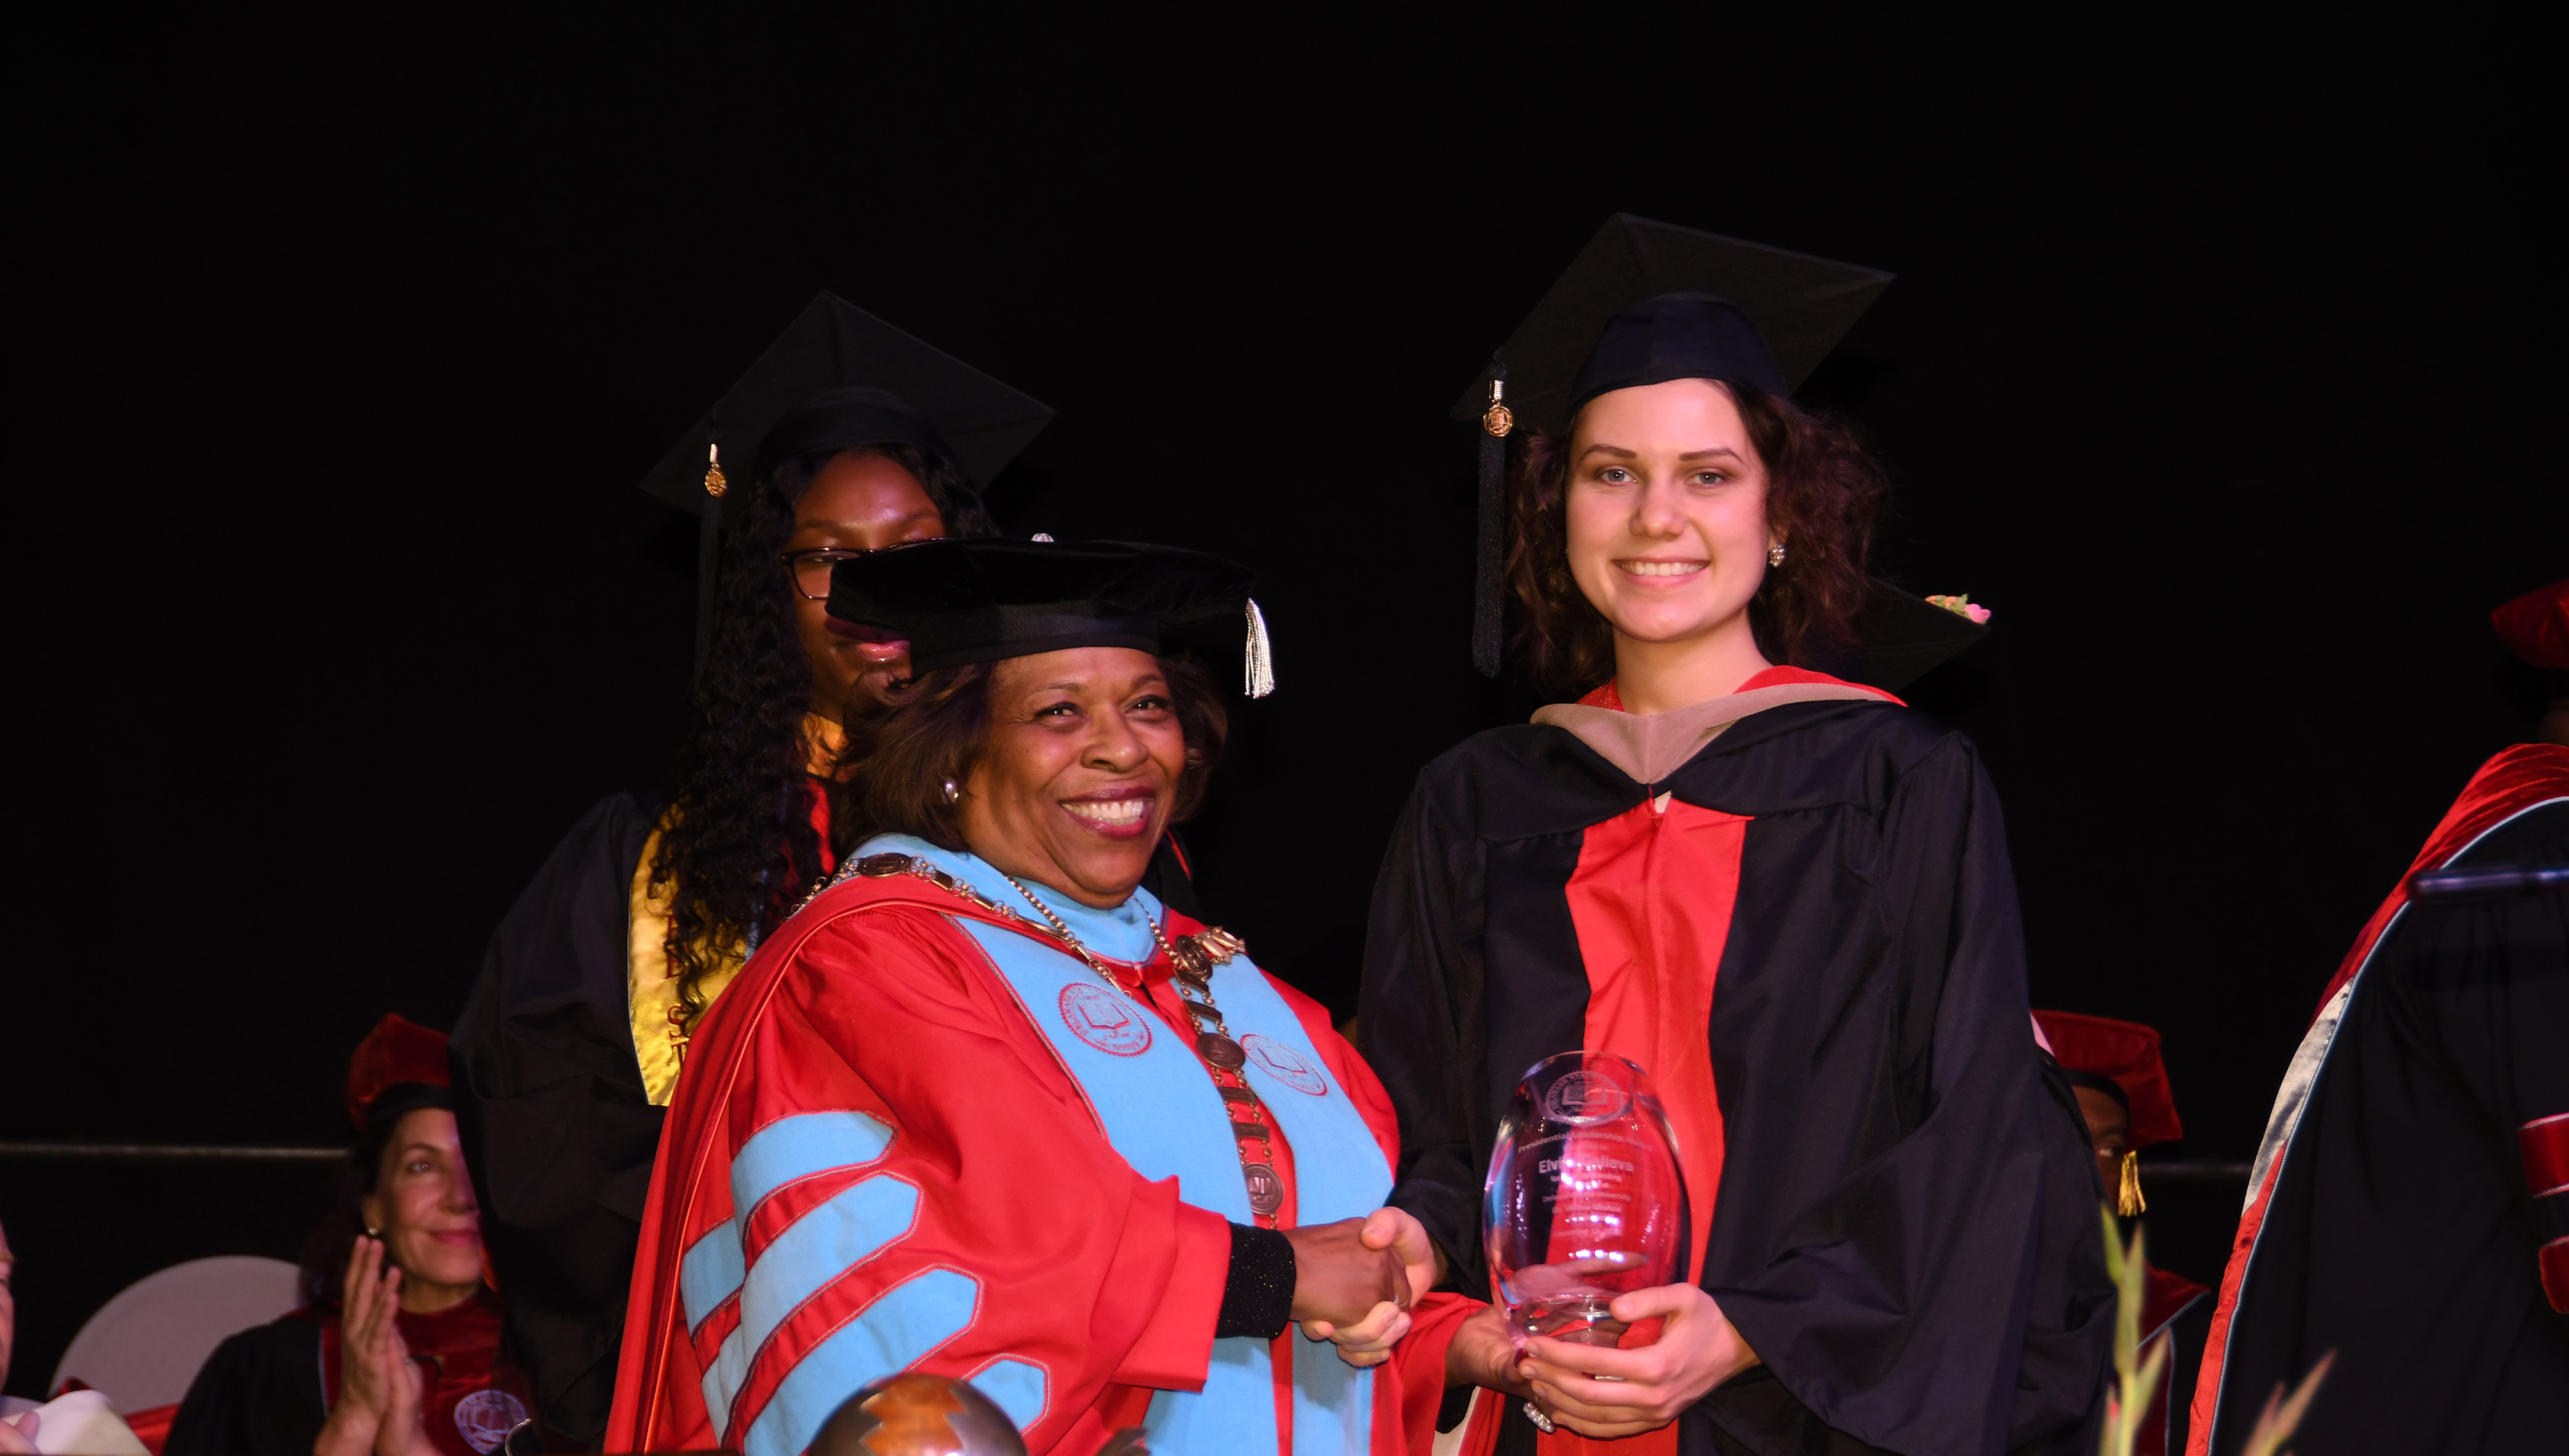 University President Wilma Mishoe stands with Elvira Galieva, who she presented both the Presidential Academic and Leadership awards during the December Commencement Ceremony. 